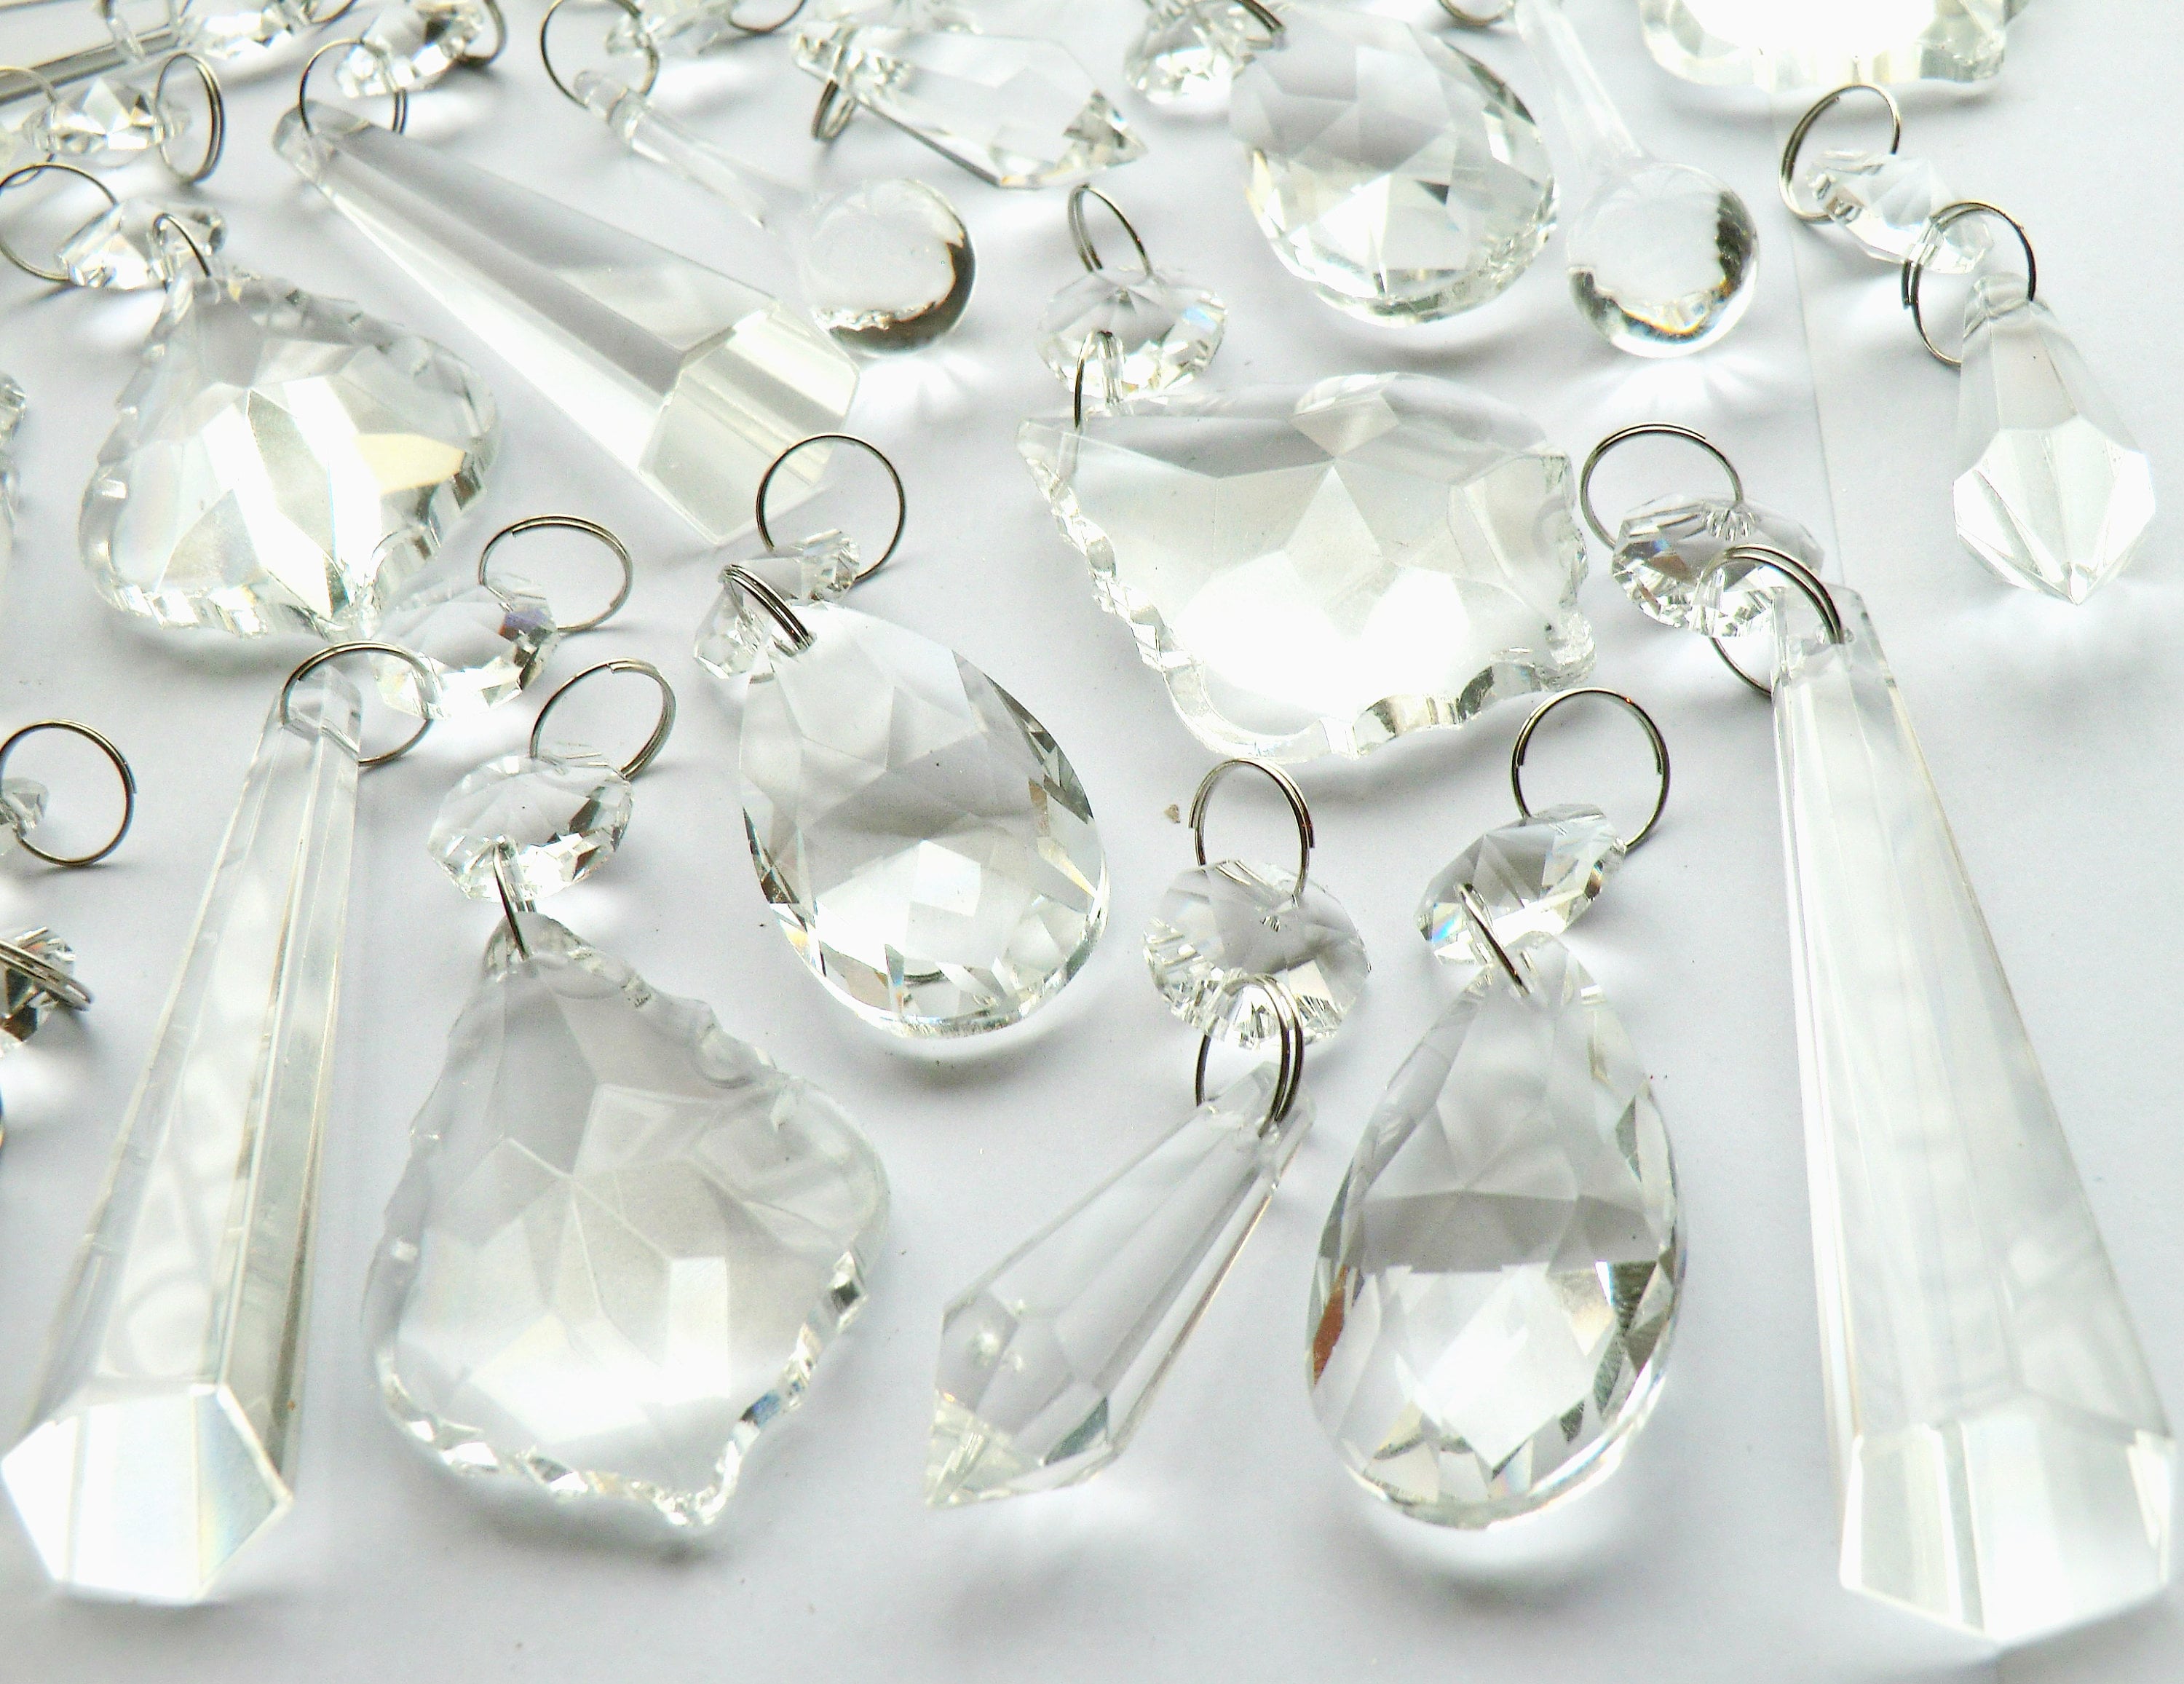 25 Clear Chandelier Drops Cut Glass Crystals Droplets Beads Christmas Tree Wedding Wishing Charm Table Decorations Prisms Retro Beads Light Lamp Parts